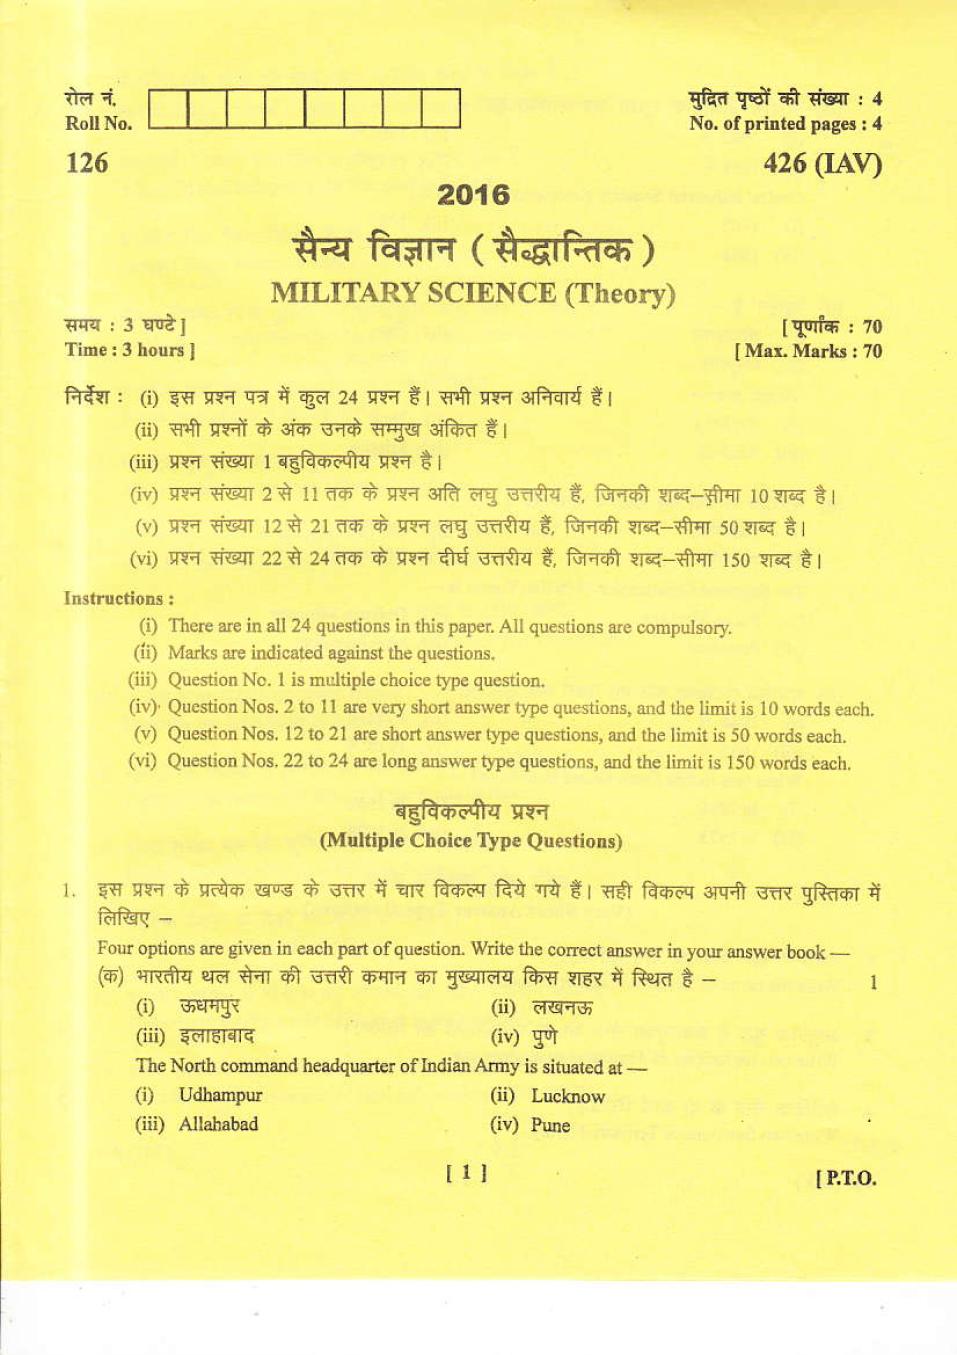 Uttarakhand Board Class 12 Question Paper 2016 for Military Science - Page 1